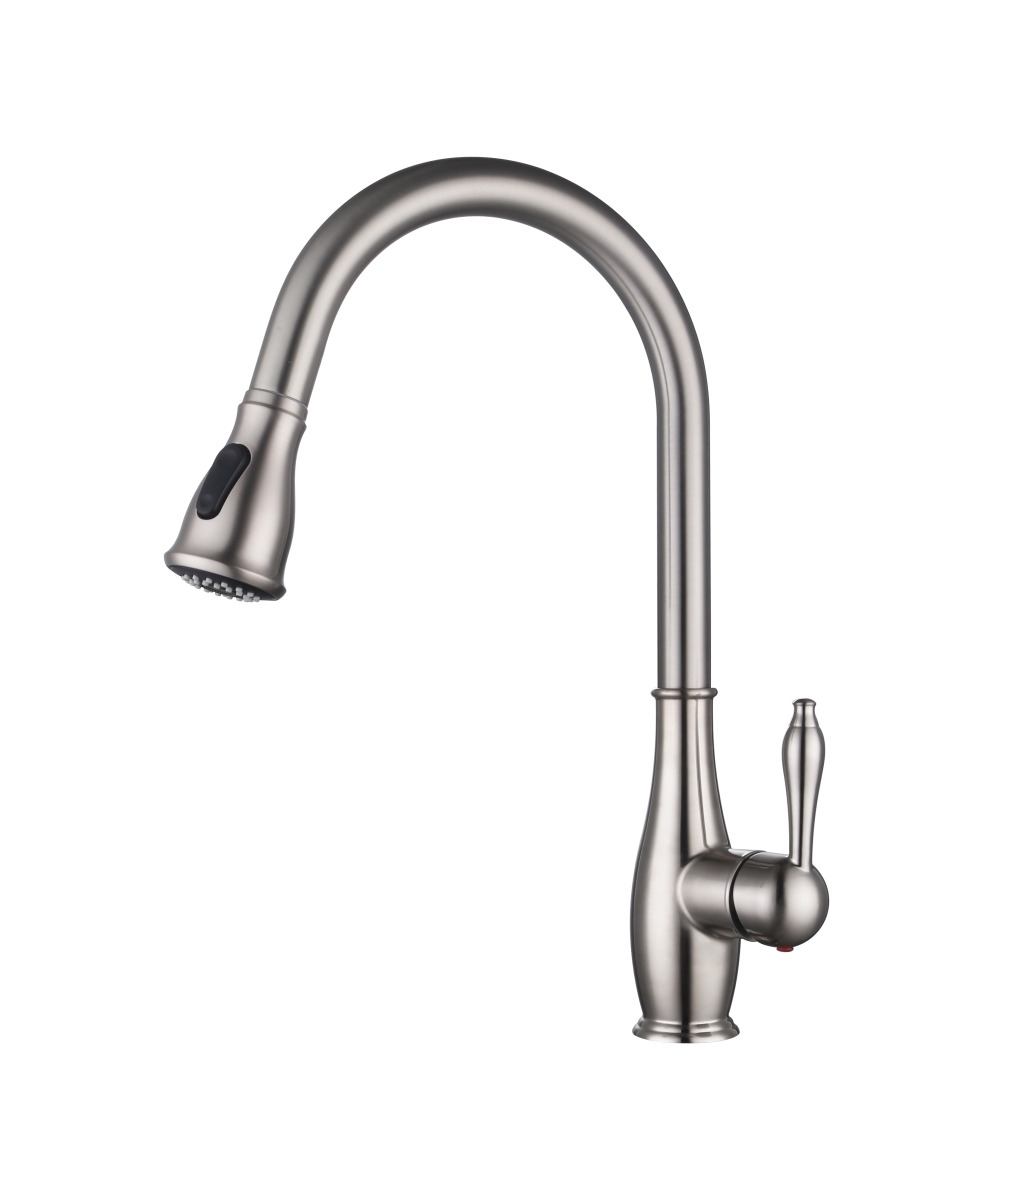 F80002 Bn Pull Out Kitchen Faucet, Brushed Nickel - 17.3 X 7.6 X 2.6 In.